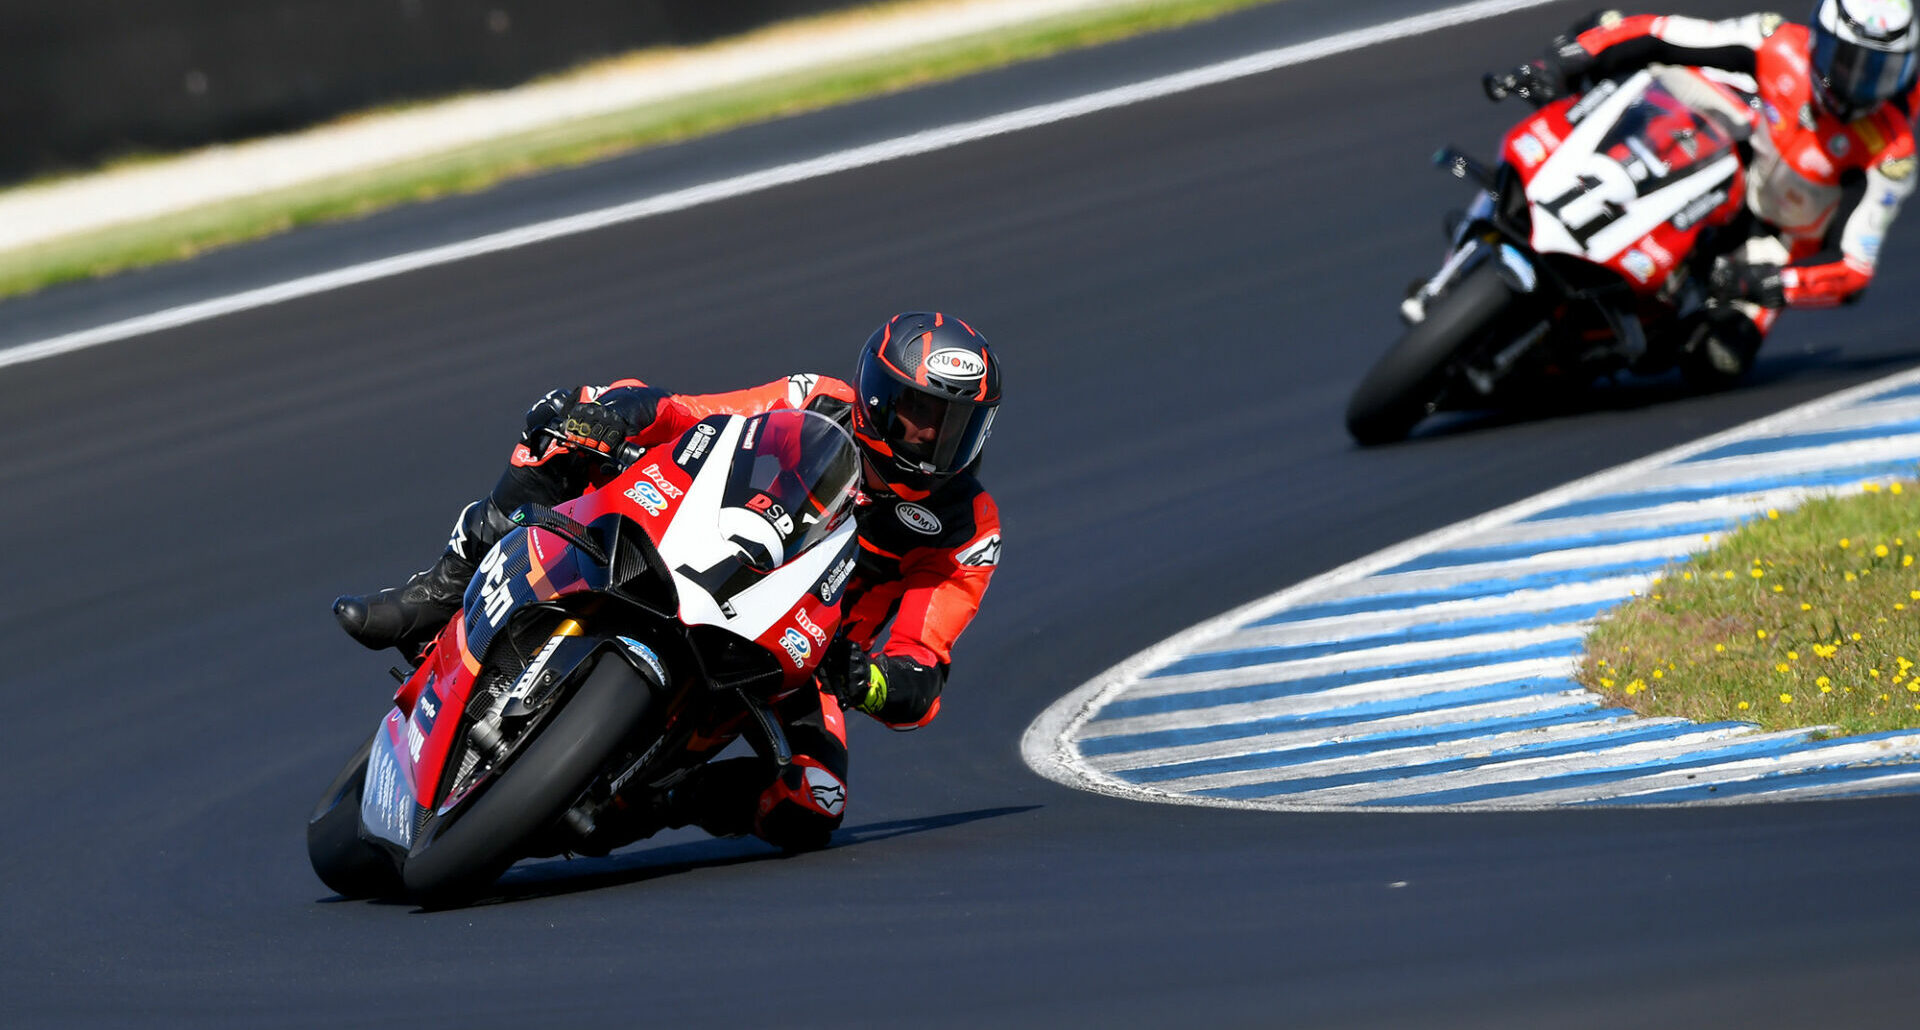 Troy Herfoss (1) at speed on his new DesmoSport Ducati Panigale V4 R. Photo by Russell Colvin, courtesy ASBK.